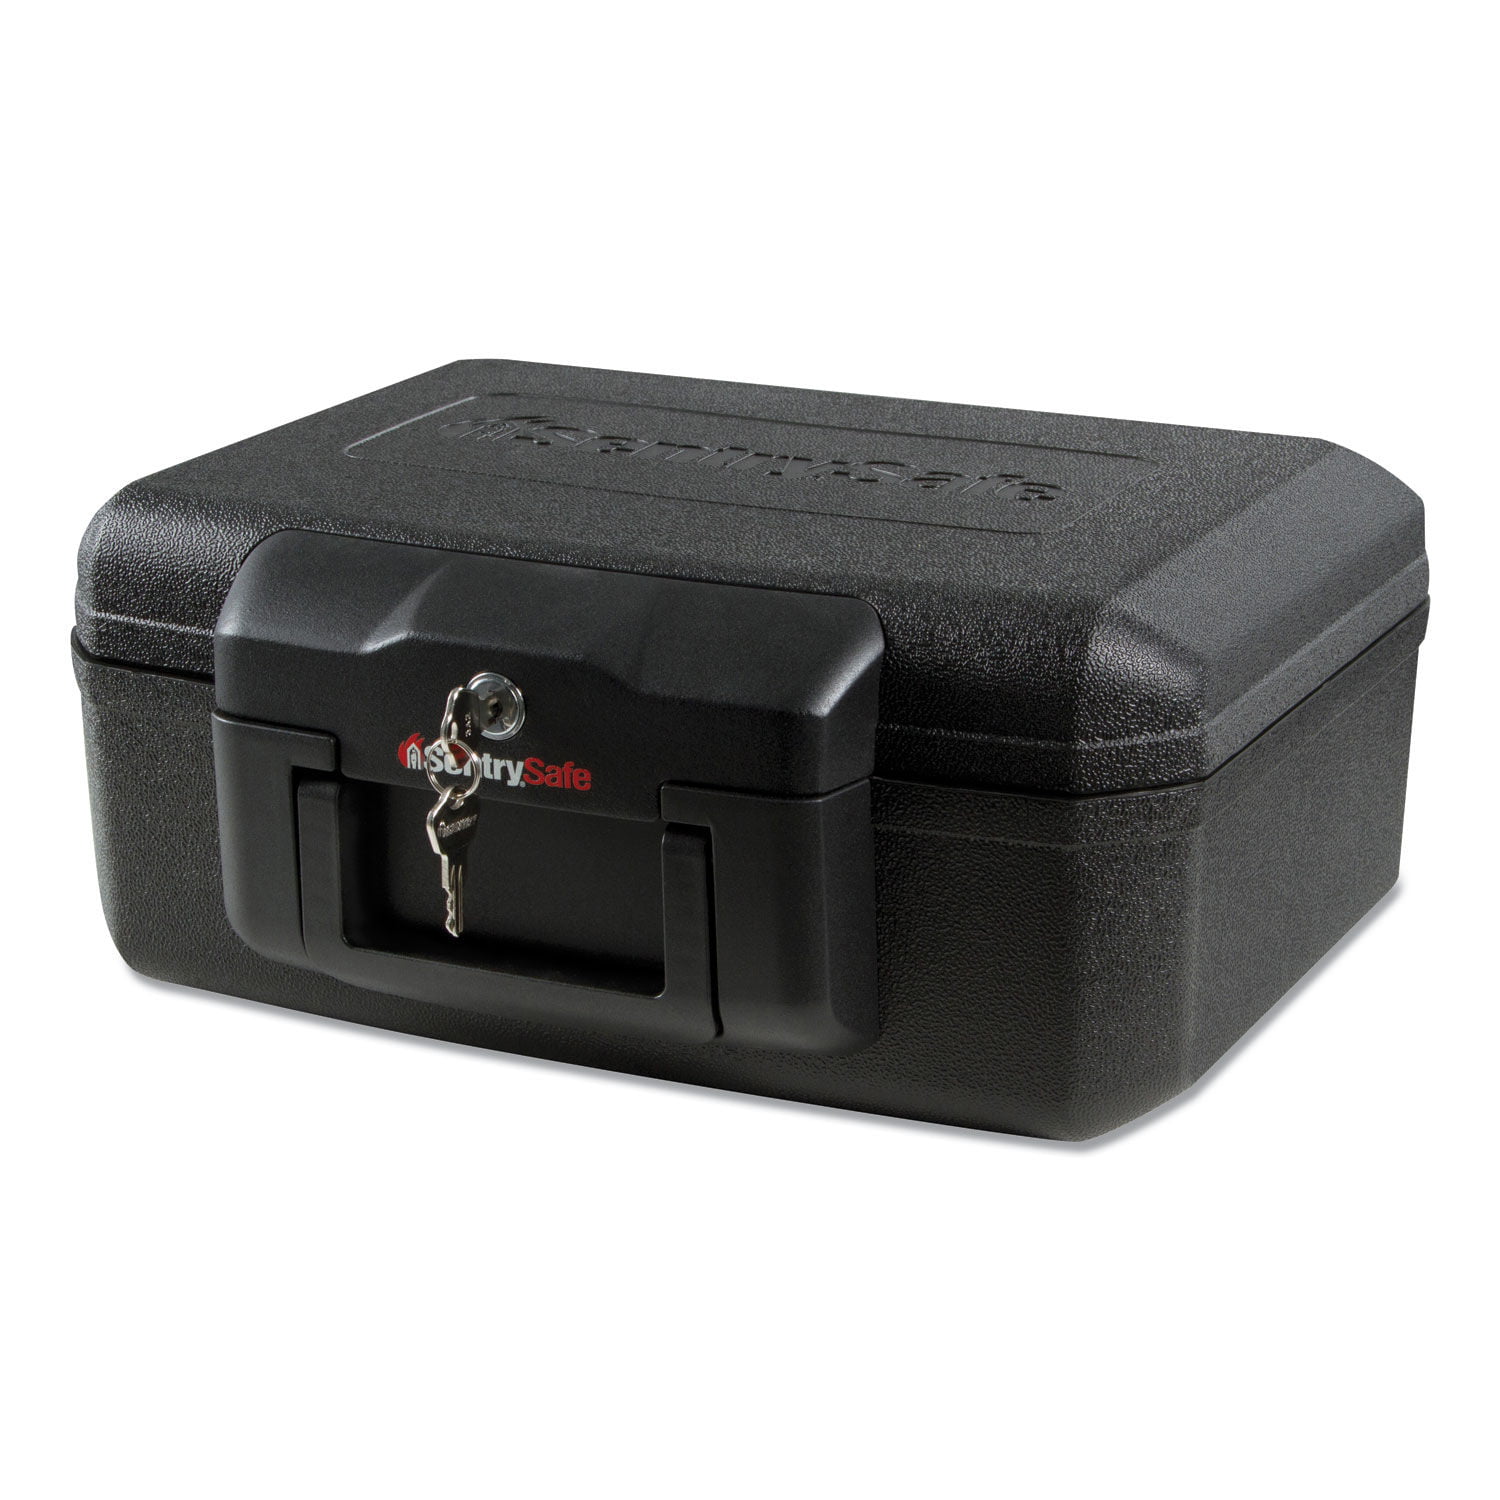 SentrySafe HD2100 Fire-Resistant Box and Waterproof Box with Key Lock 0.37 cu ft 